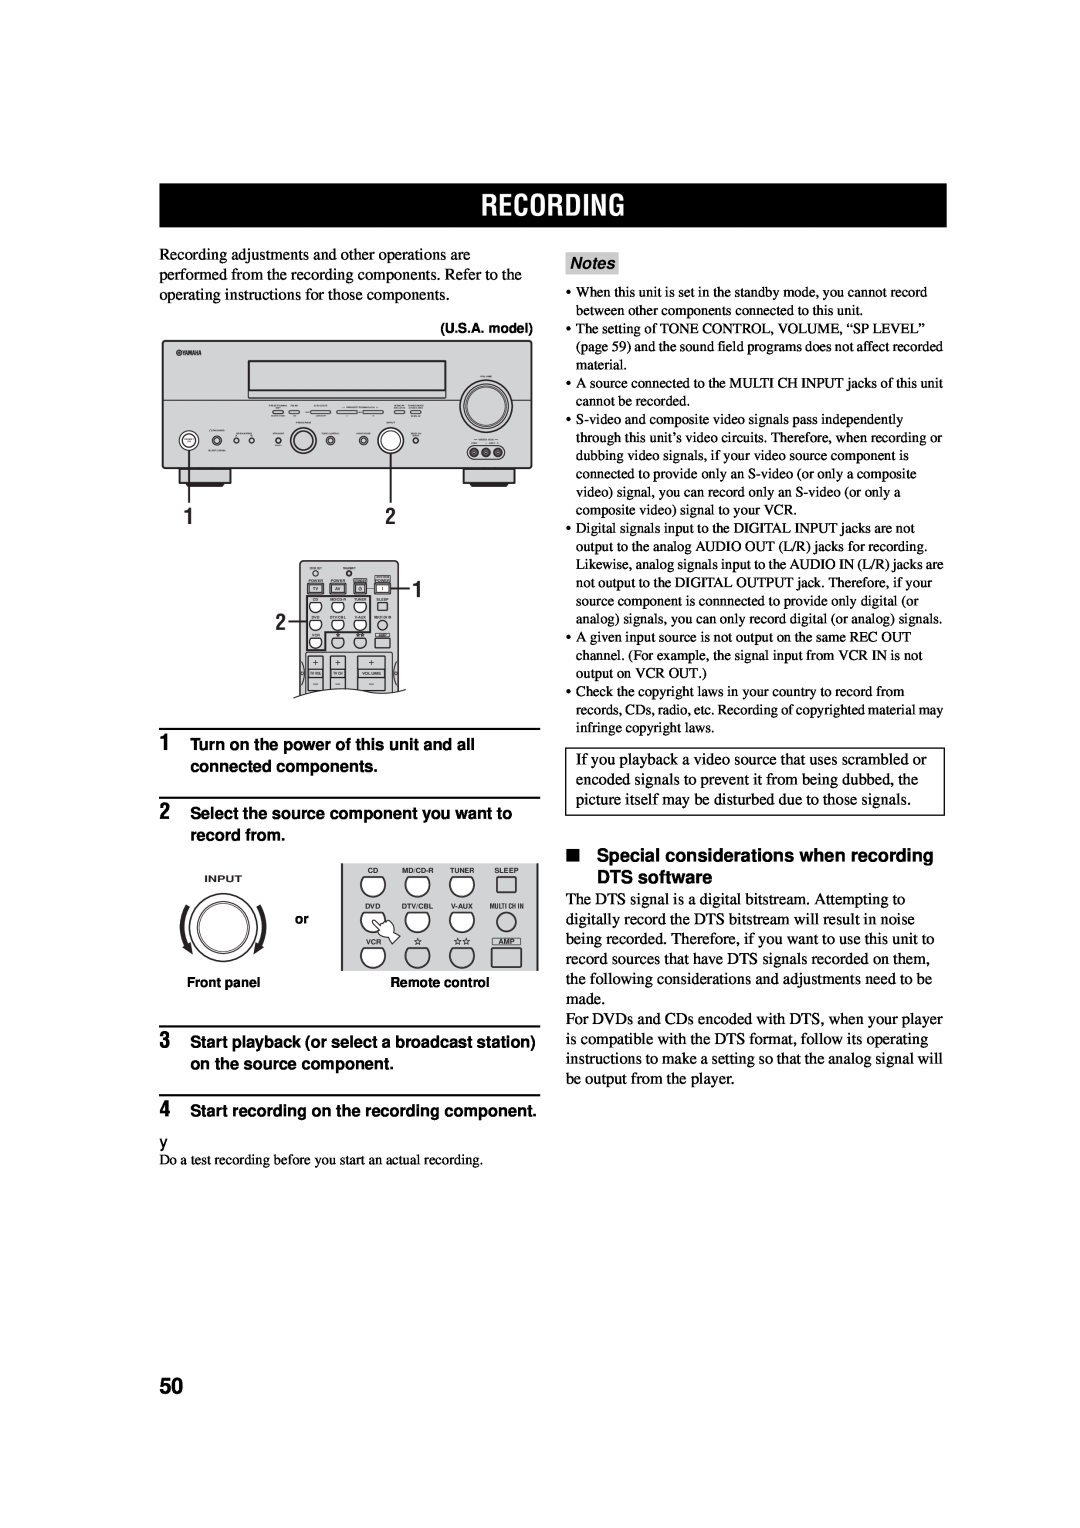 Yamaha AV Receiver owner manual Recording, Special considerations when recording, DTS software, Notes 